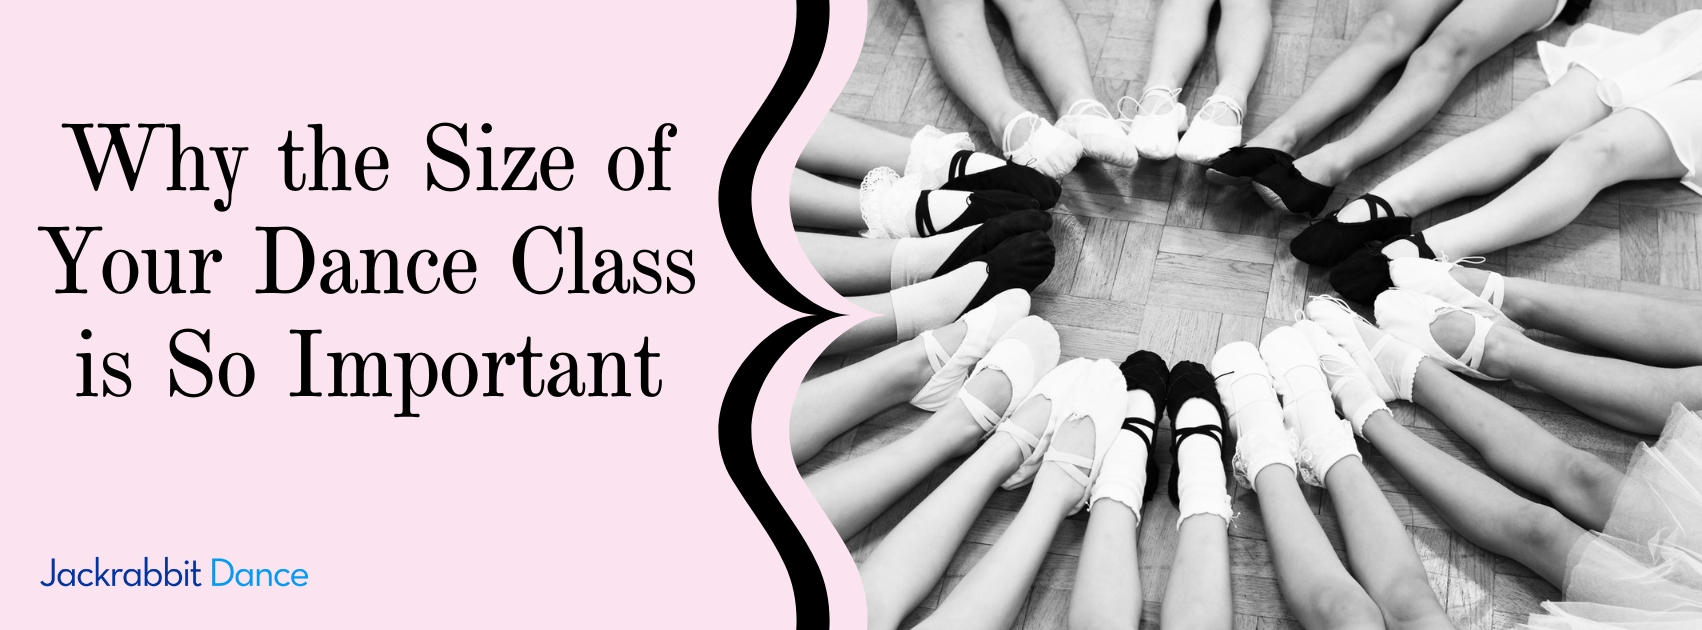 Why the size of your dance class is so important